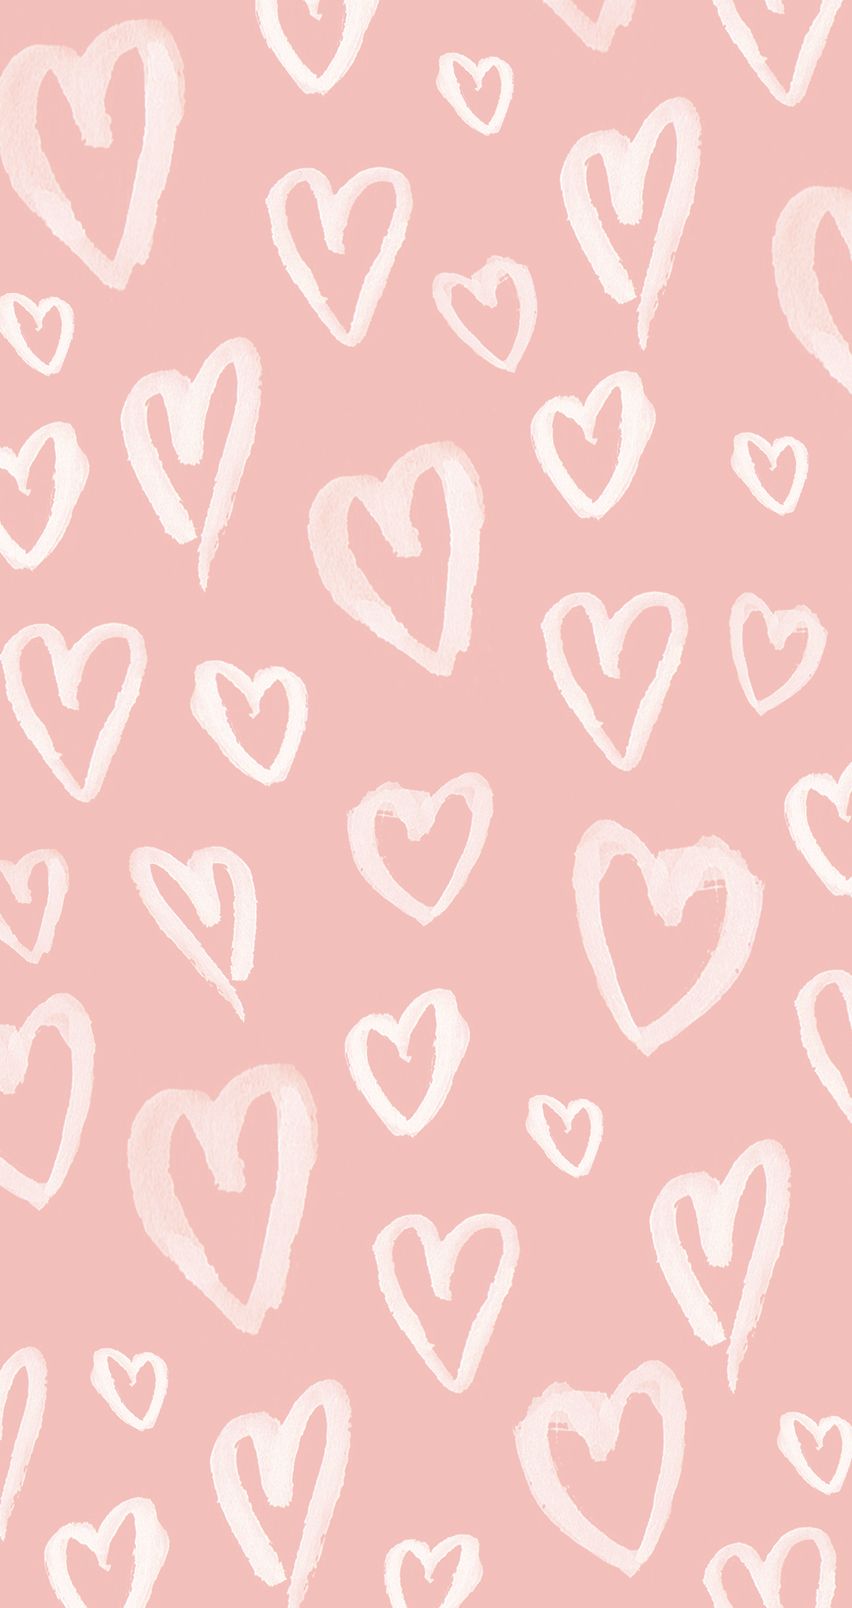 70+ Pastel Pink Background Hearts